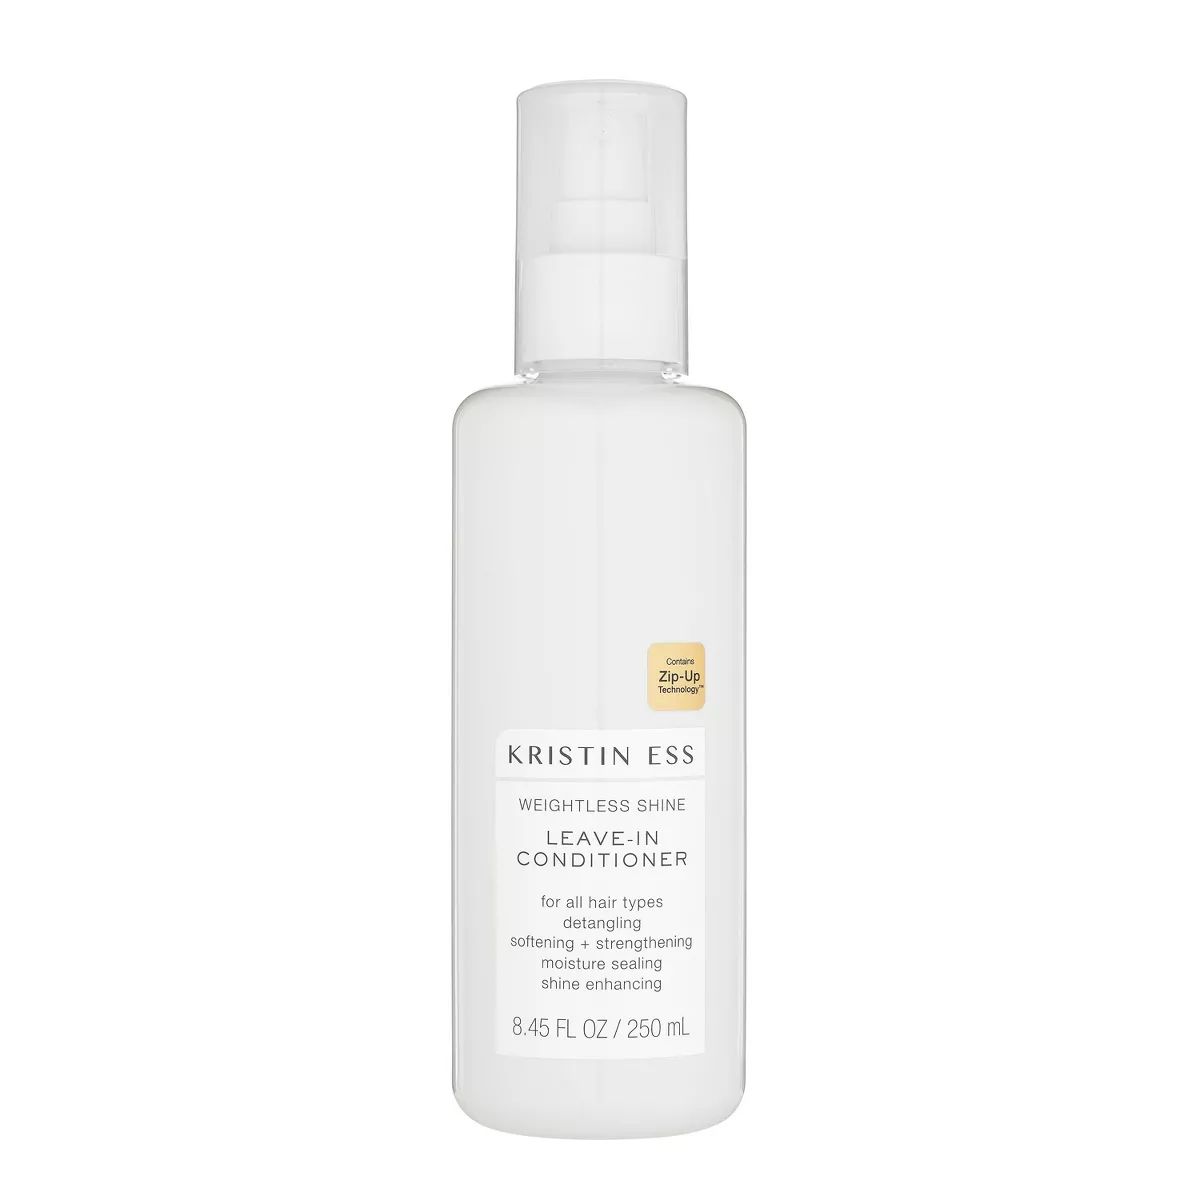 Kristin Ess Weightless Shine Leave In Conditioner Spray for Dry Damaged Hair - 8.45 fl oz | Target